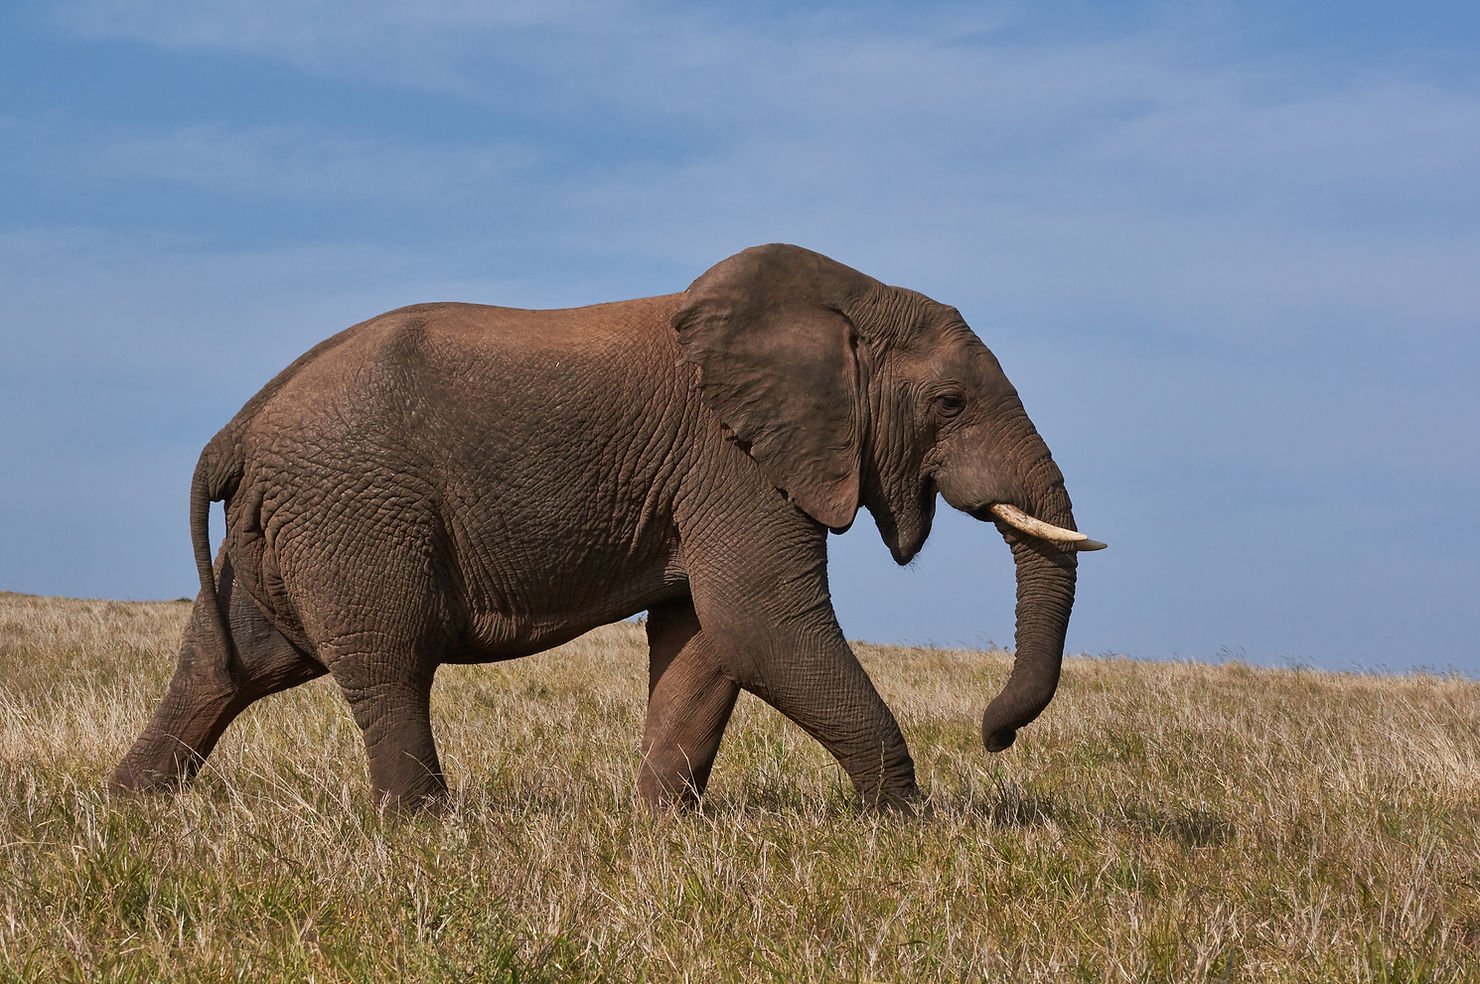 elephants-whales-experience-menopause